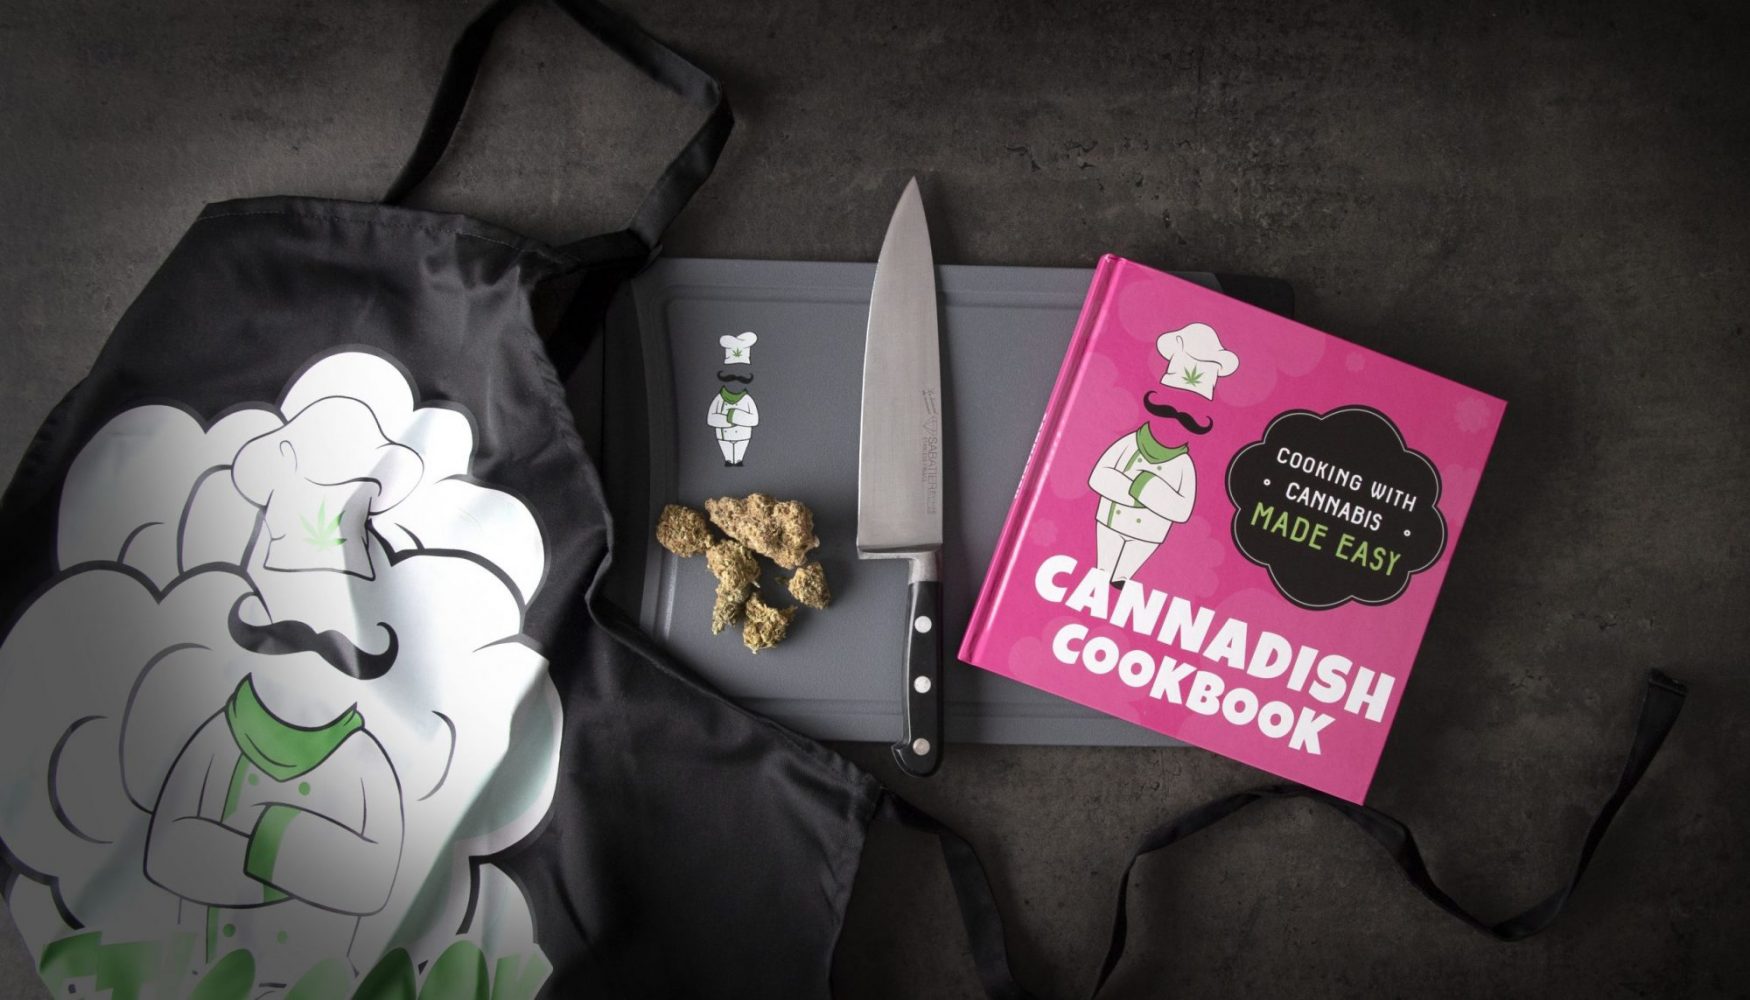 Cannabis cooking products with apron and cookbook